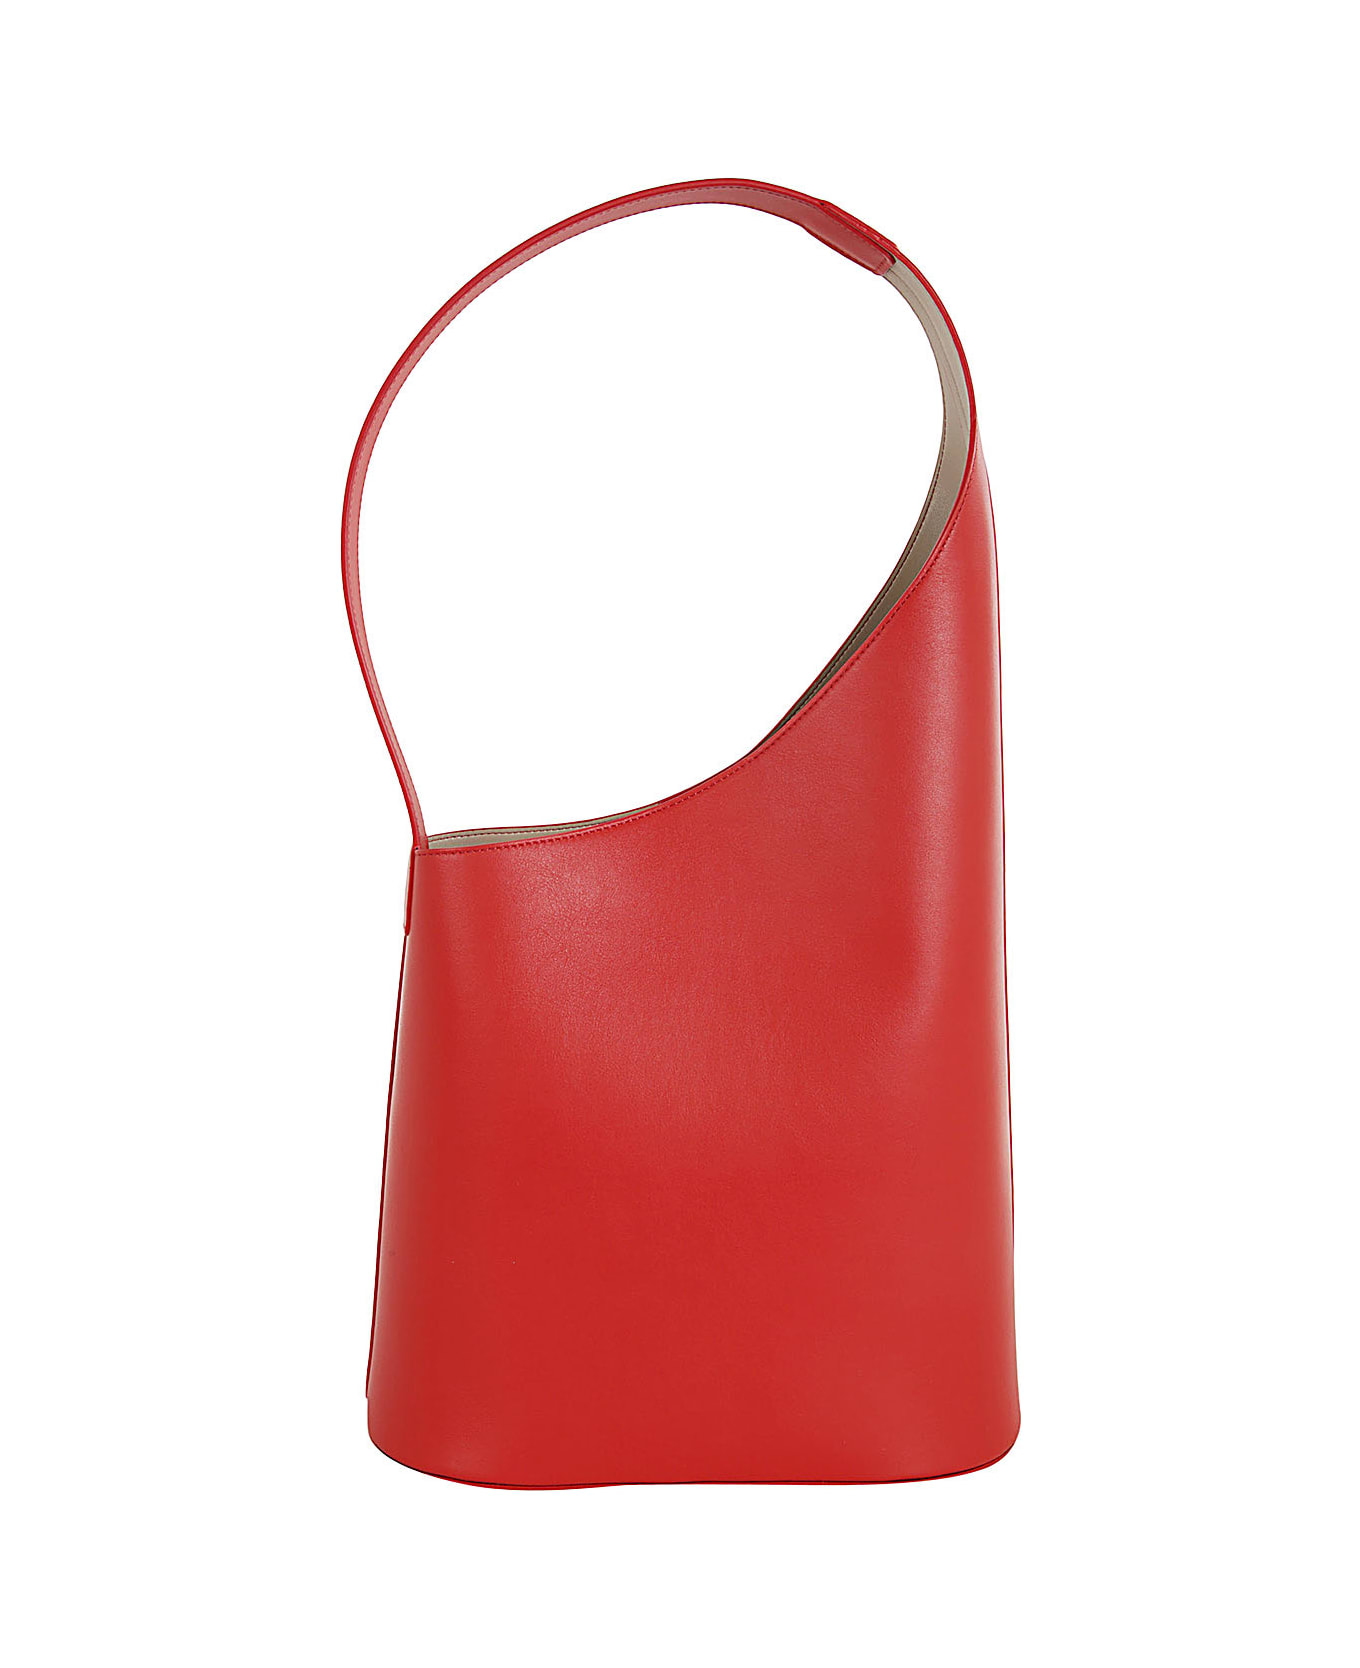 Aesther Ekme Demi Lune Tote Bag - Parrot